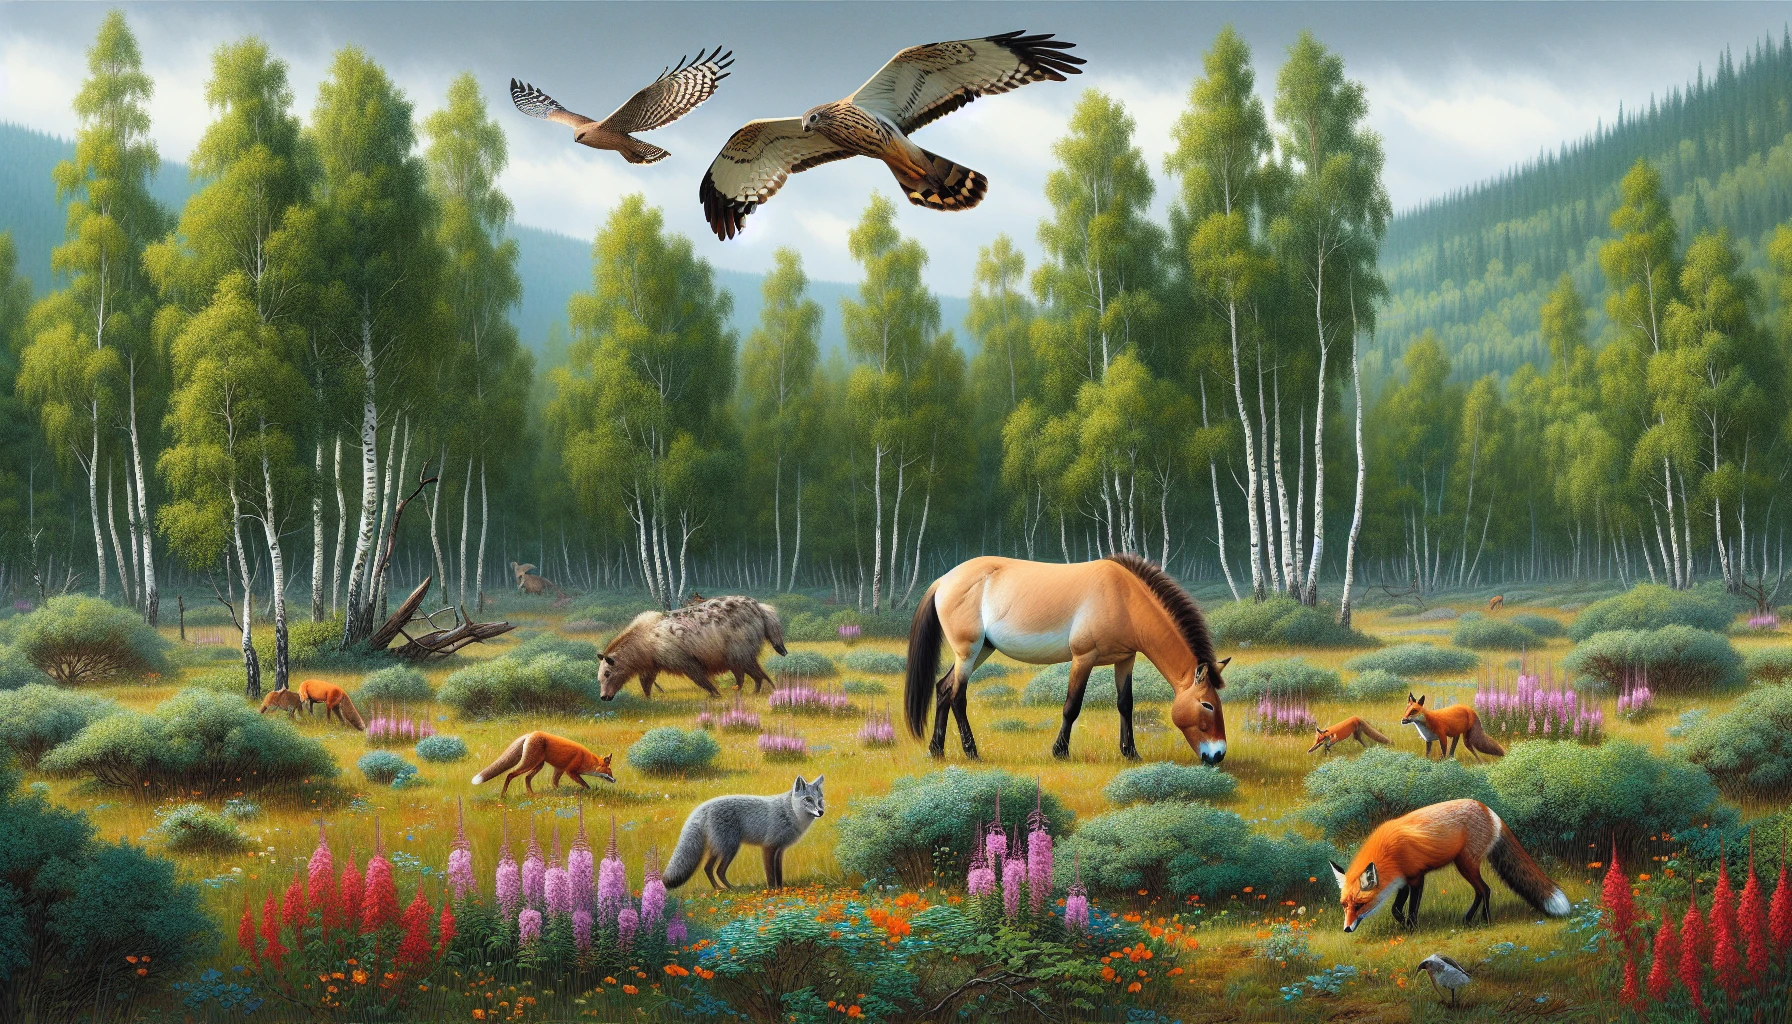 Illustration of the diverse flora and fauna in Hustai National Park